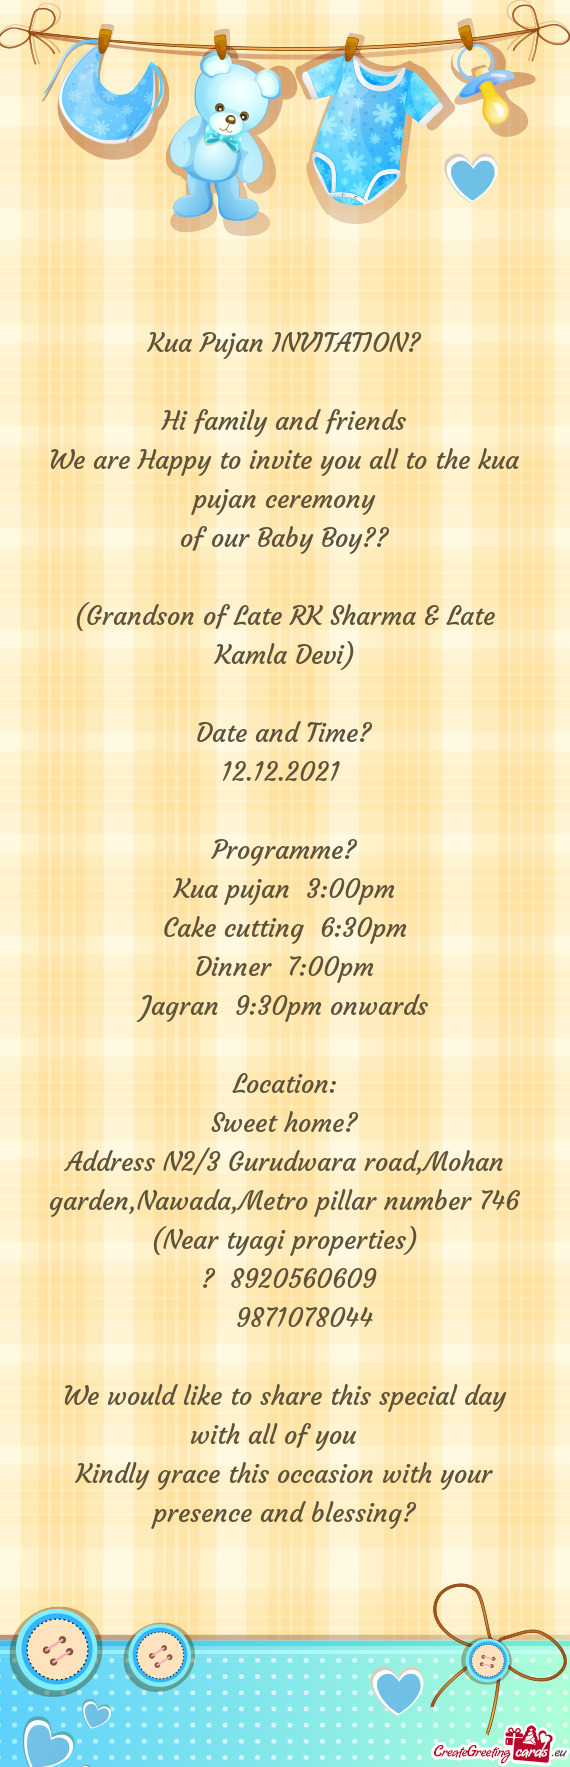 We are Happy to invite you all to the kua pujan ceremony